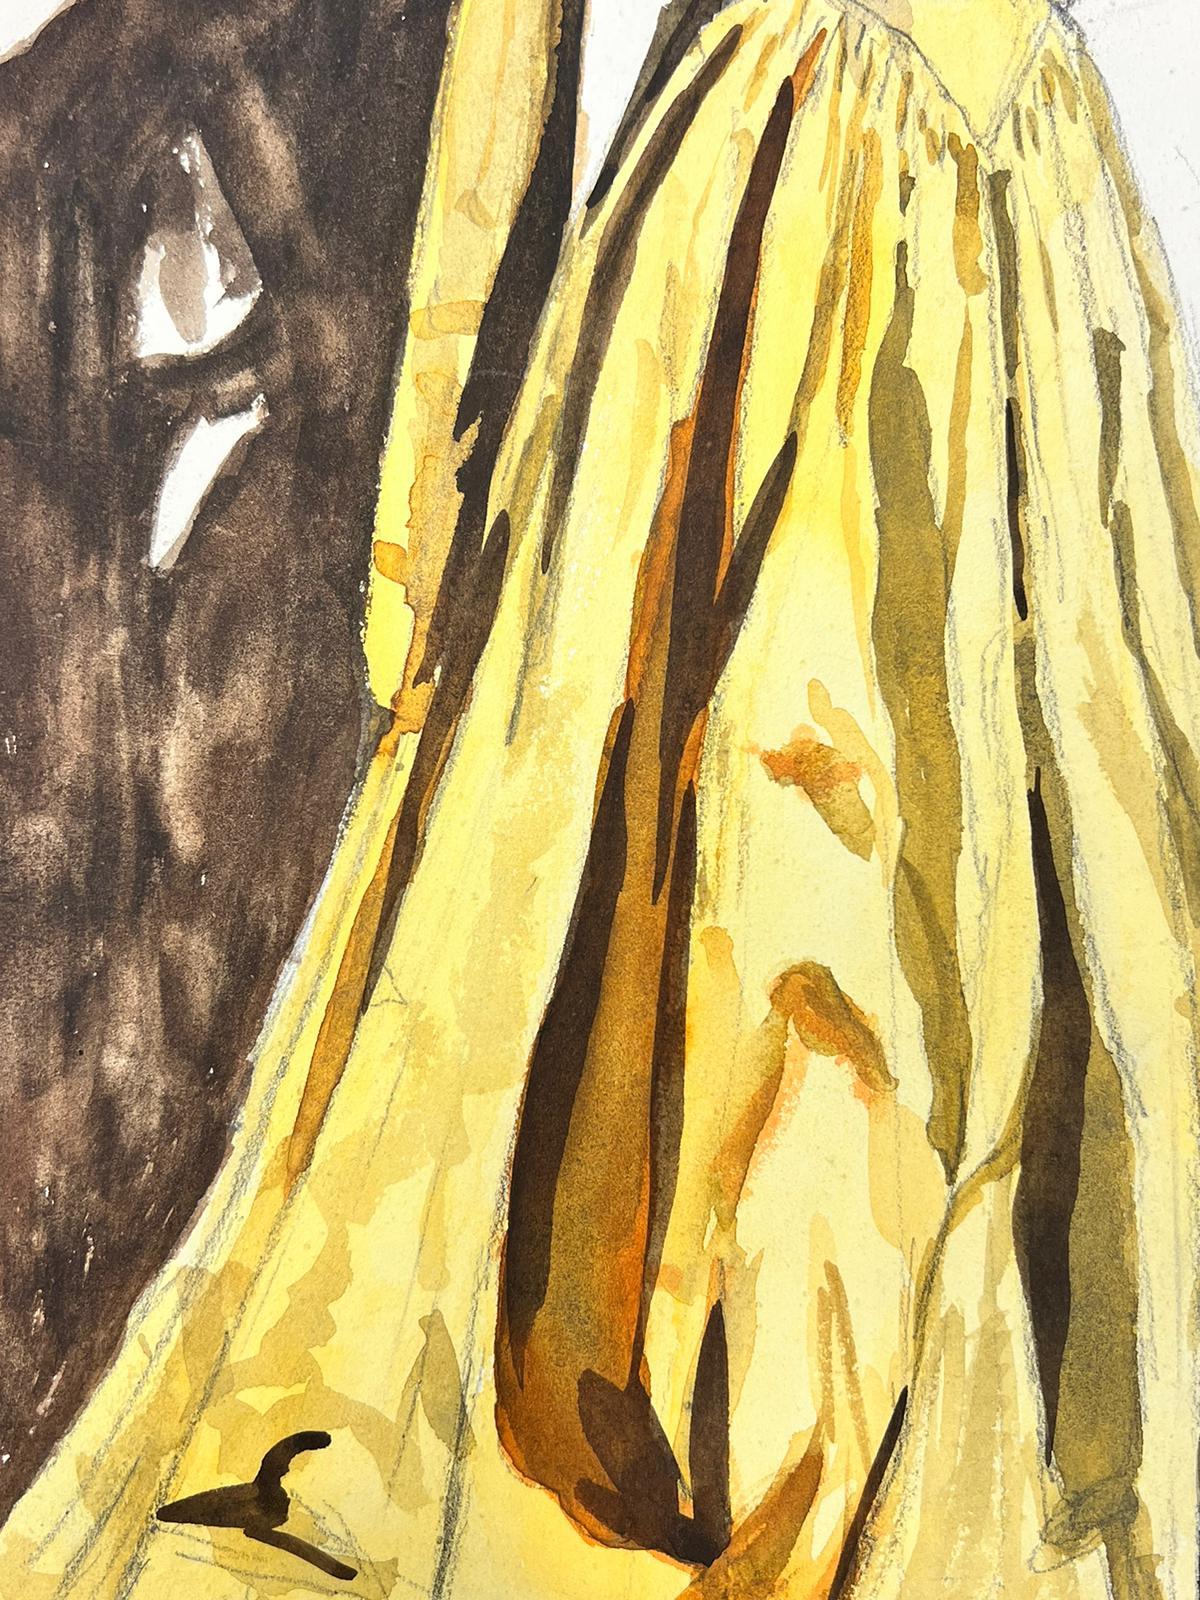 Yellow Ballgown
by Josine Vignon (French 1922-2022) 
ink/watercolour/pencil drawing on thin paper, unframed
paper: 13 x 10 inches
stamped verso
very good condition 
provenance: from the artists estate, France

Josine Vignon (1922-2022) was a French